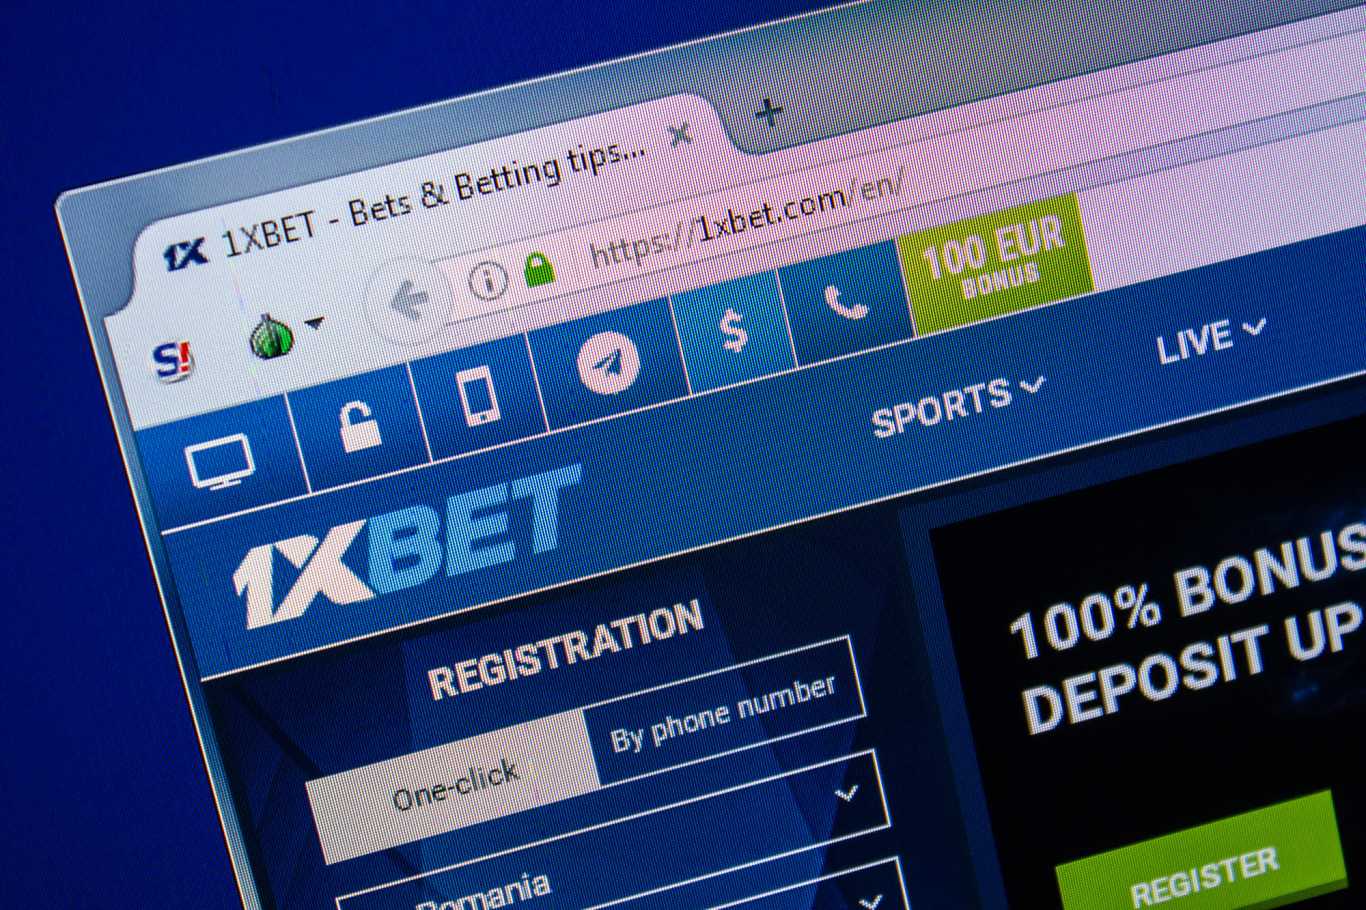 Exploring the sports betting options on 1xBet